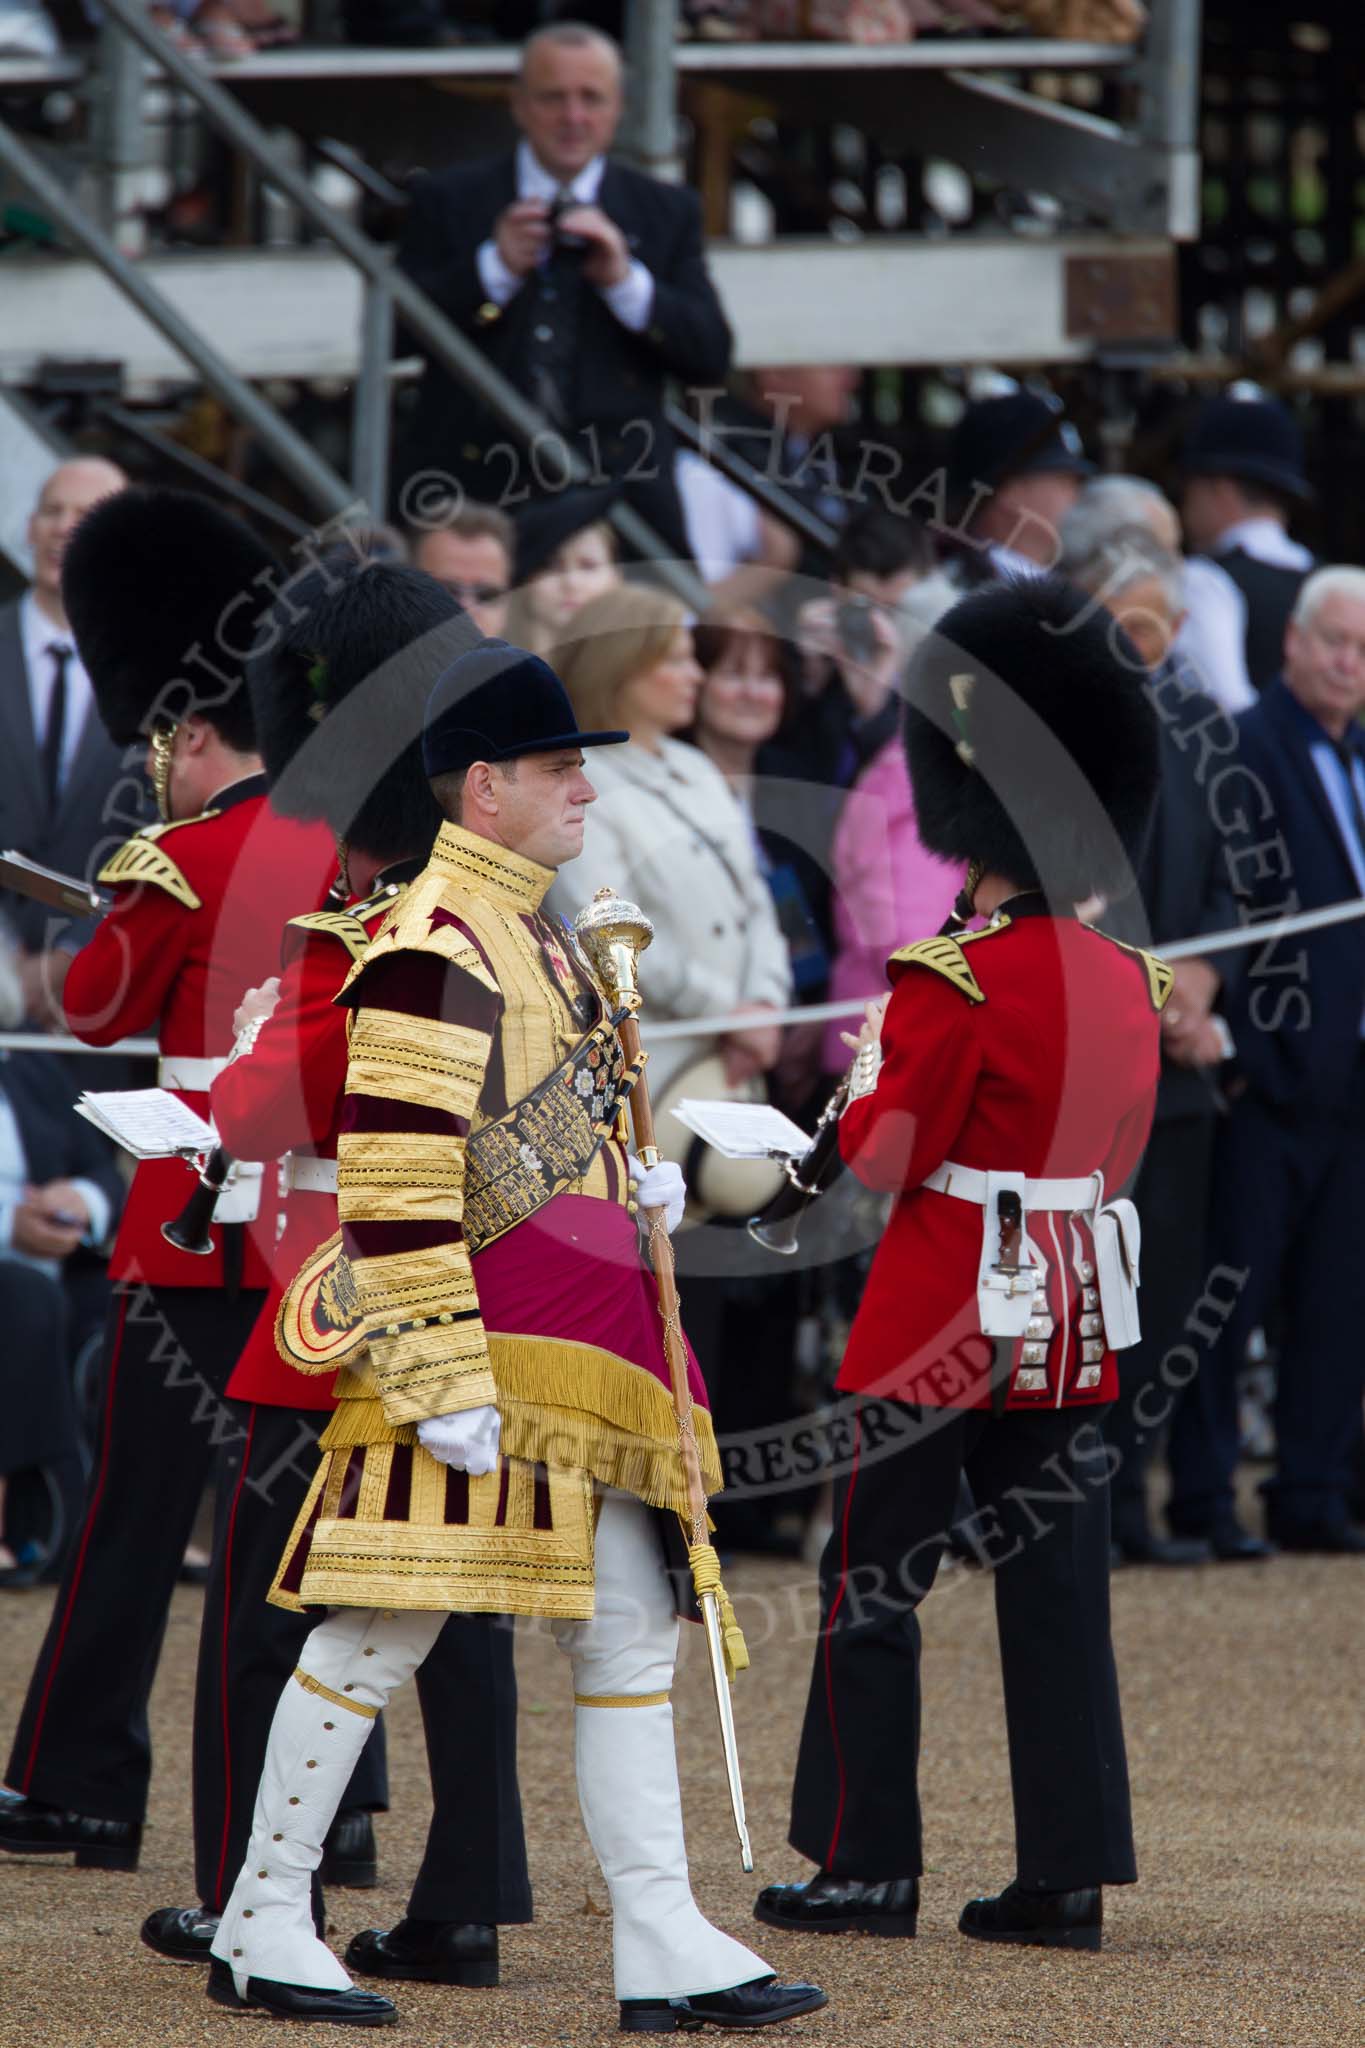 Trooping the Colour 2012: The "change of direction" again - the Band of the Welsh Guards and Senior Drum Major M Betts, Grenadier Guards..
Horse Guards Parade, Westminster,
London SW1,

United Kingdom,
on 16 June 2012 at 10:14, image #27